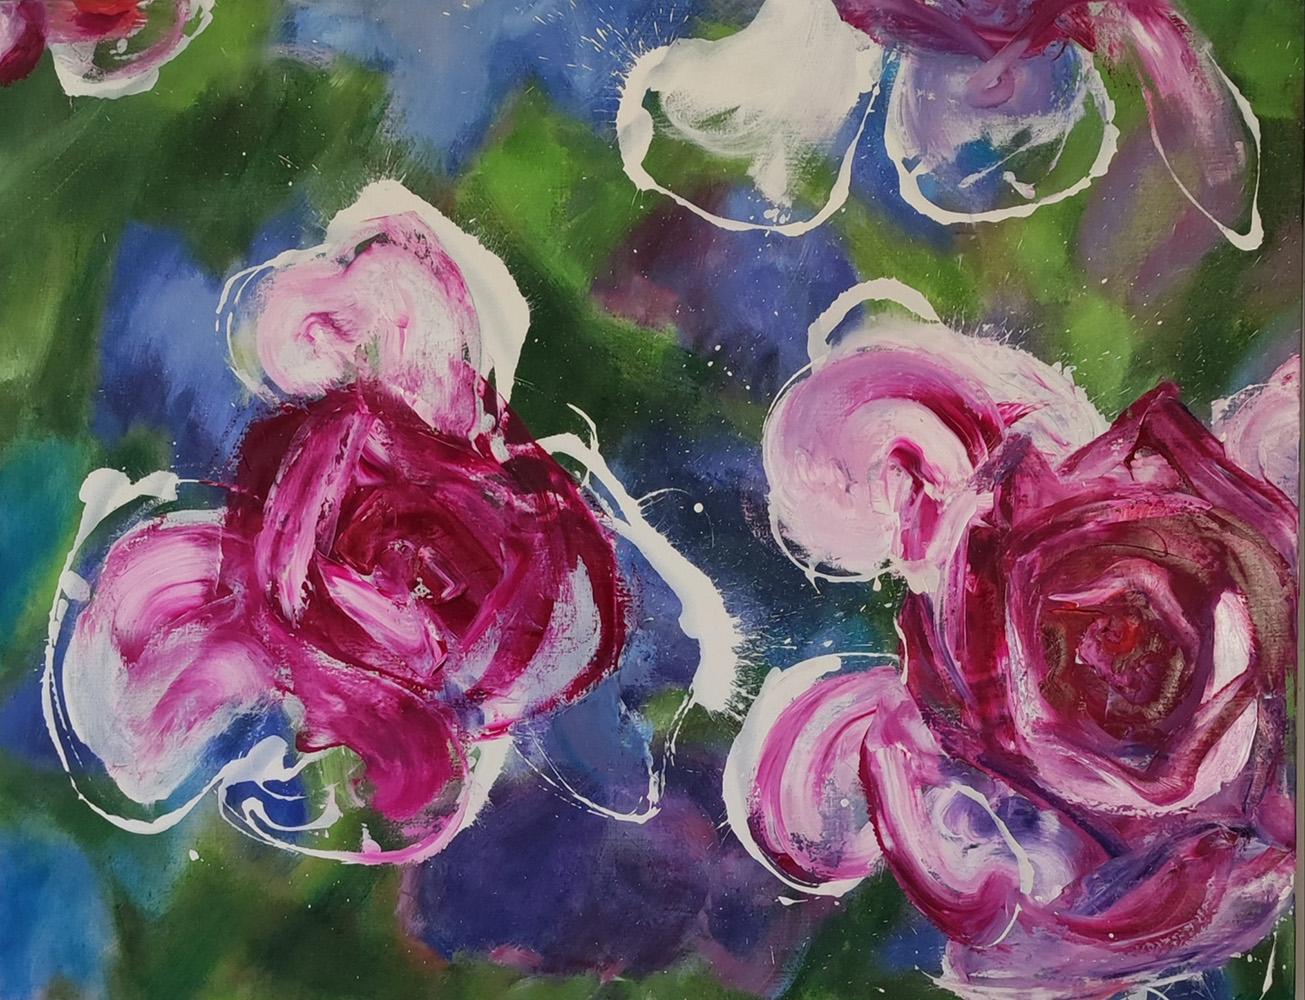 Water Roses is a unique oil on canvas painting by contemporary artist Christophe Dupety, dimensions are 89 × 116 cm (35 × 45.7 in).
The artwork is signed, sold unframed and comes with a certificate of authenticity.

This painting represents a swirls